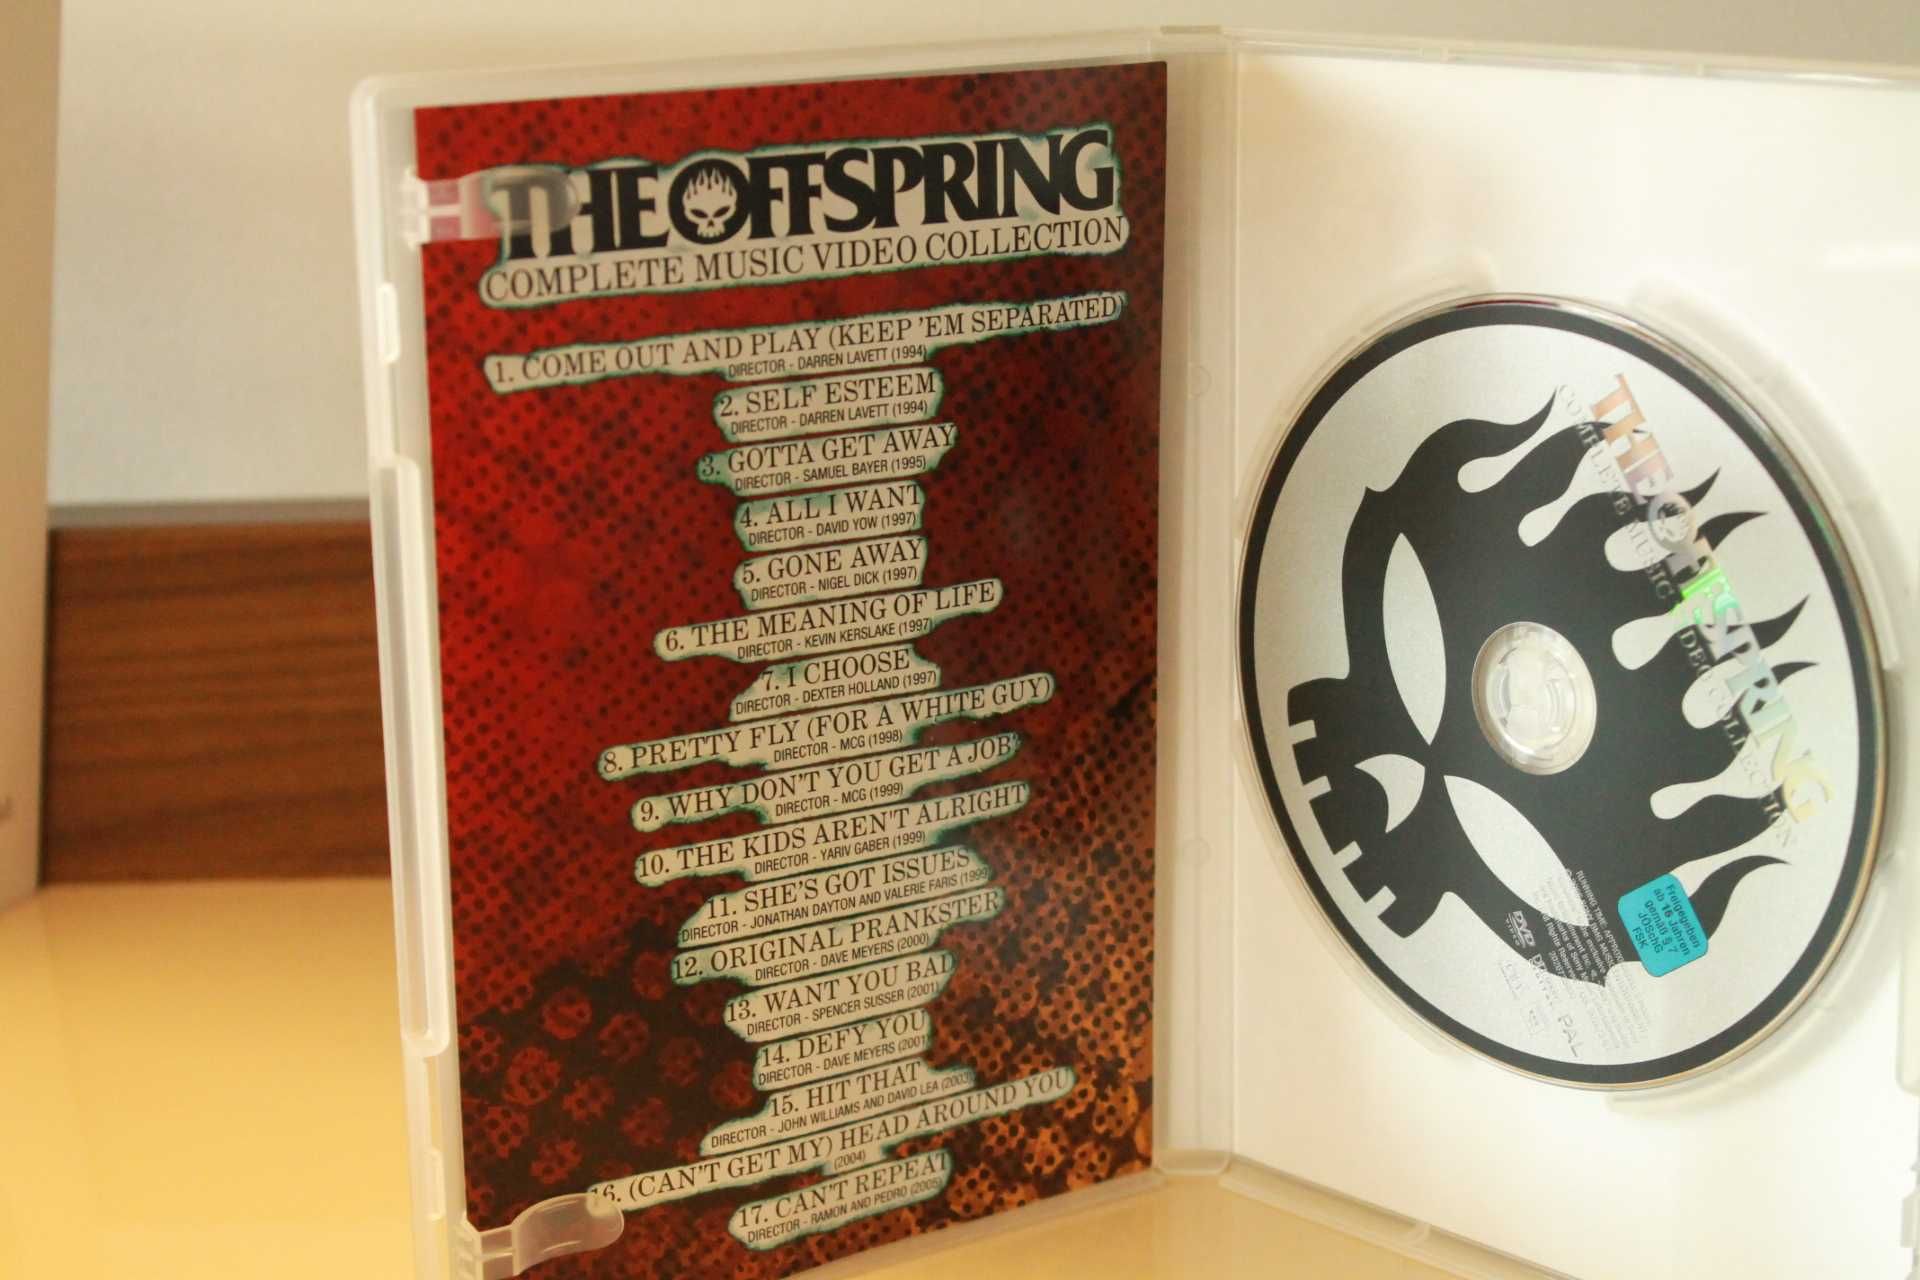 The Offspring Complete Music Video Collection (DVD)